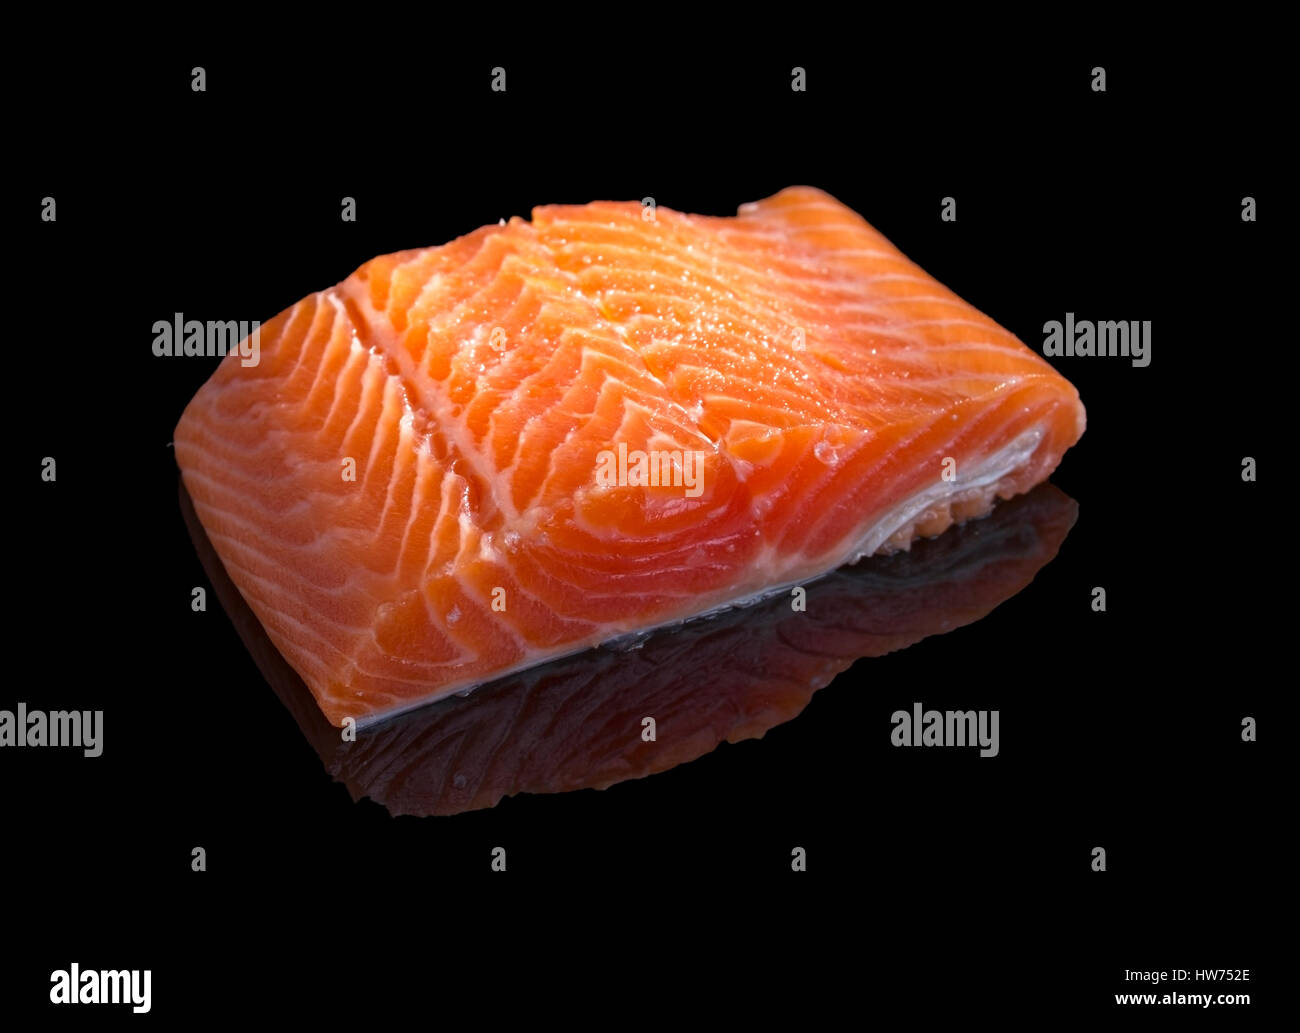 Raw salmon steak isolated on black background with reflection. Stock Photo